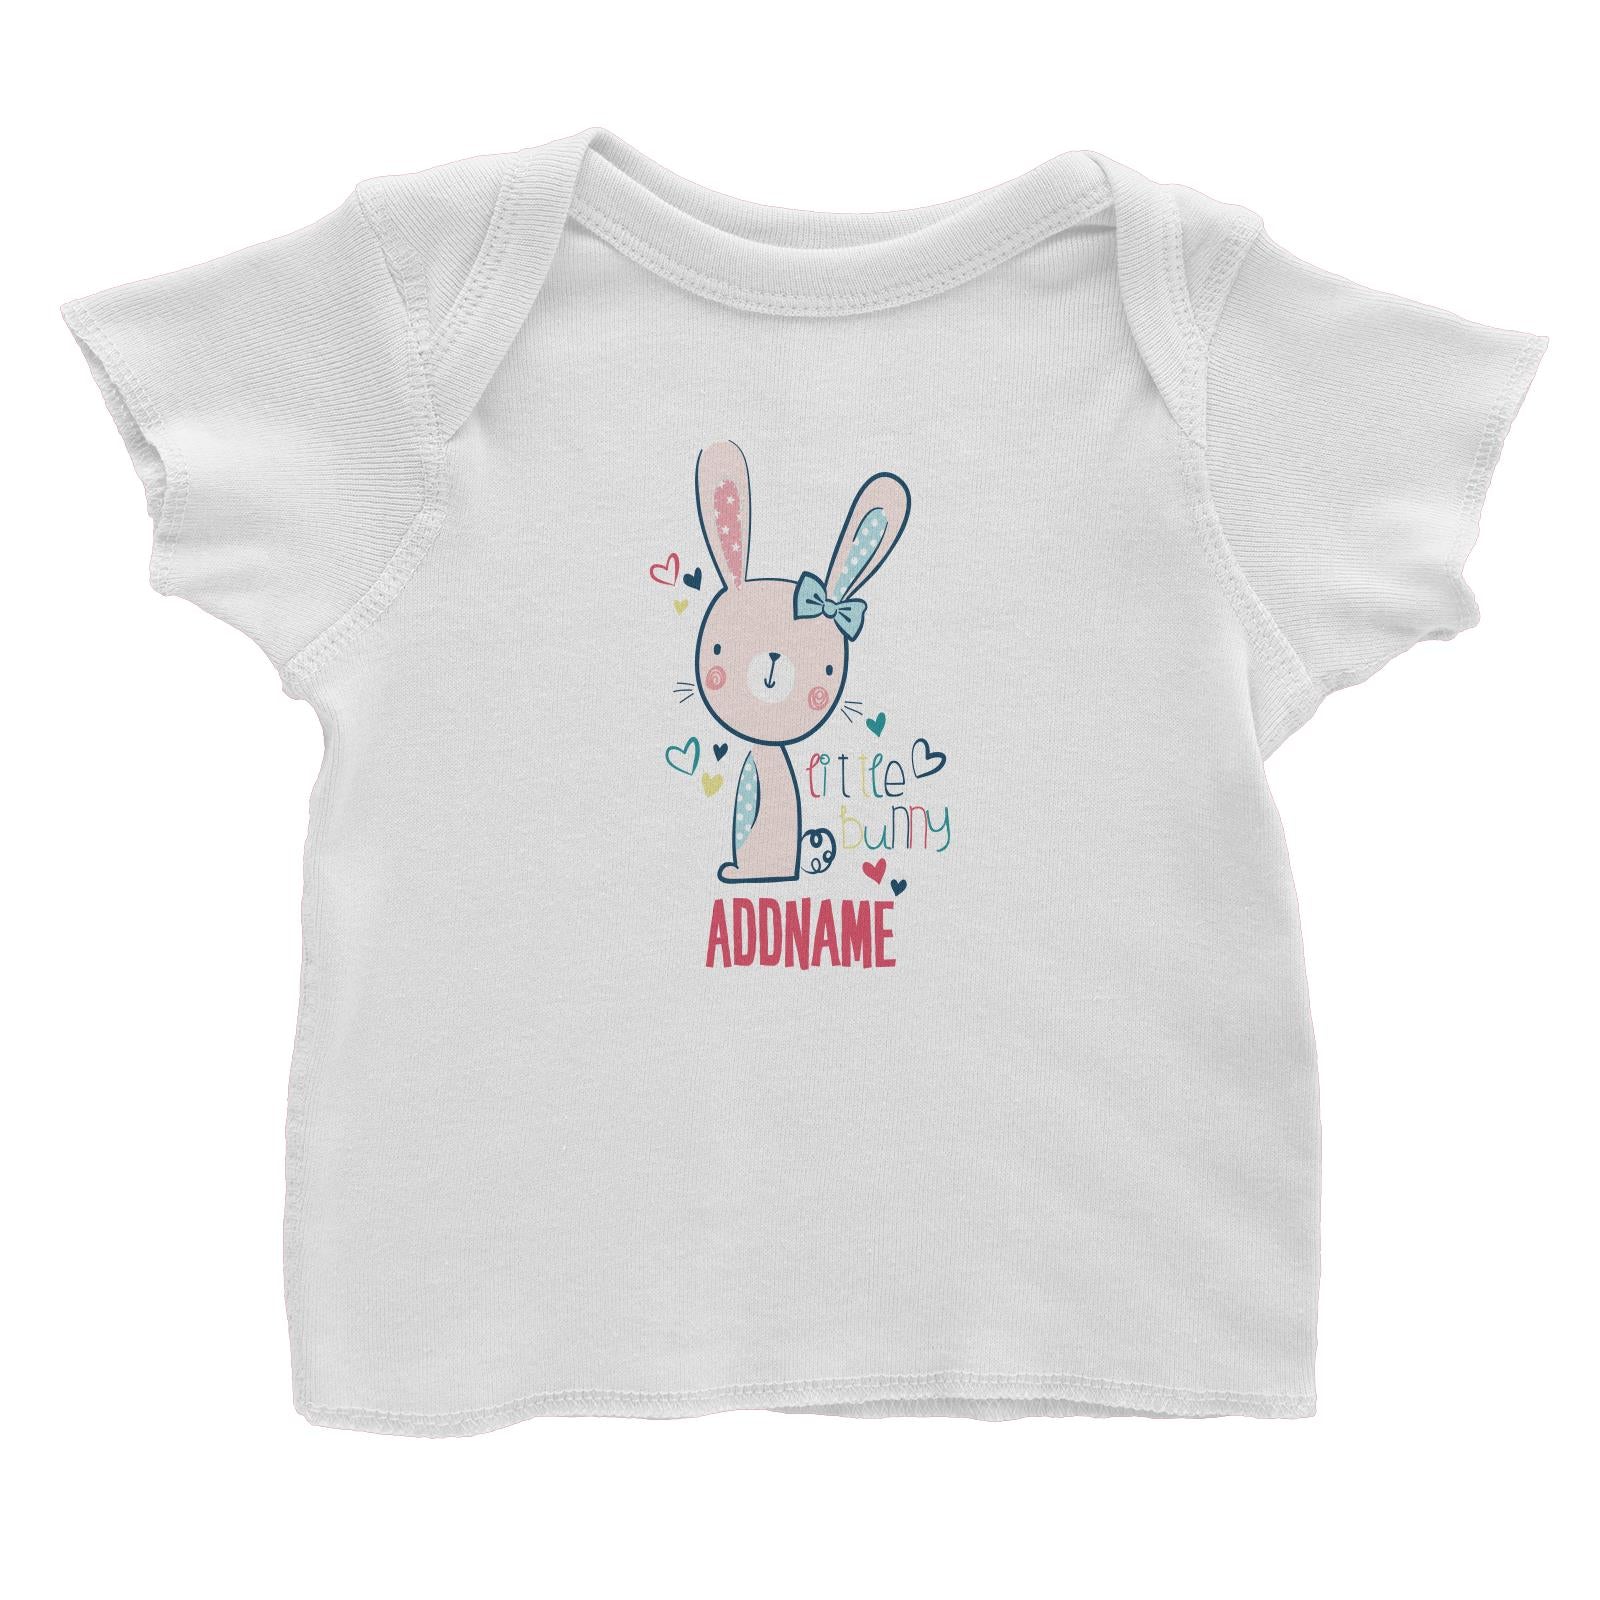 Cool Vibrant Series Cute Little Bunny Addname Baby T-Shirt [SALE]